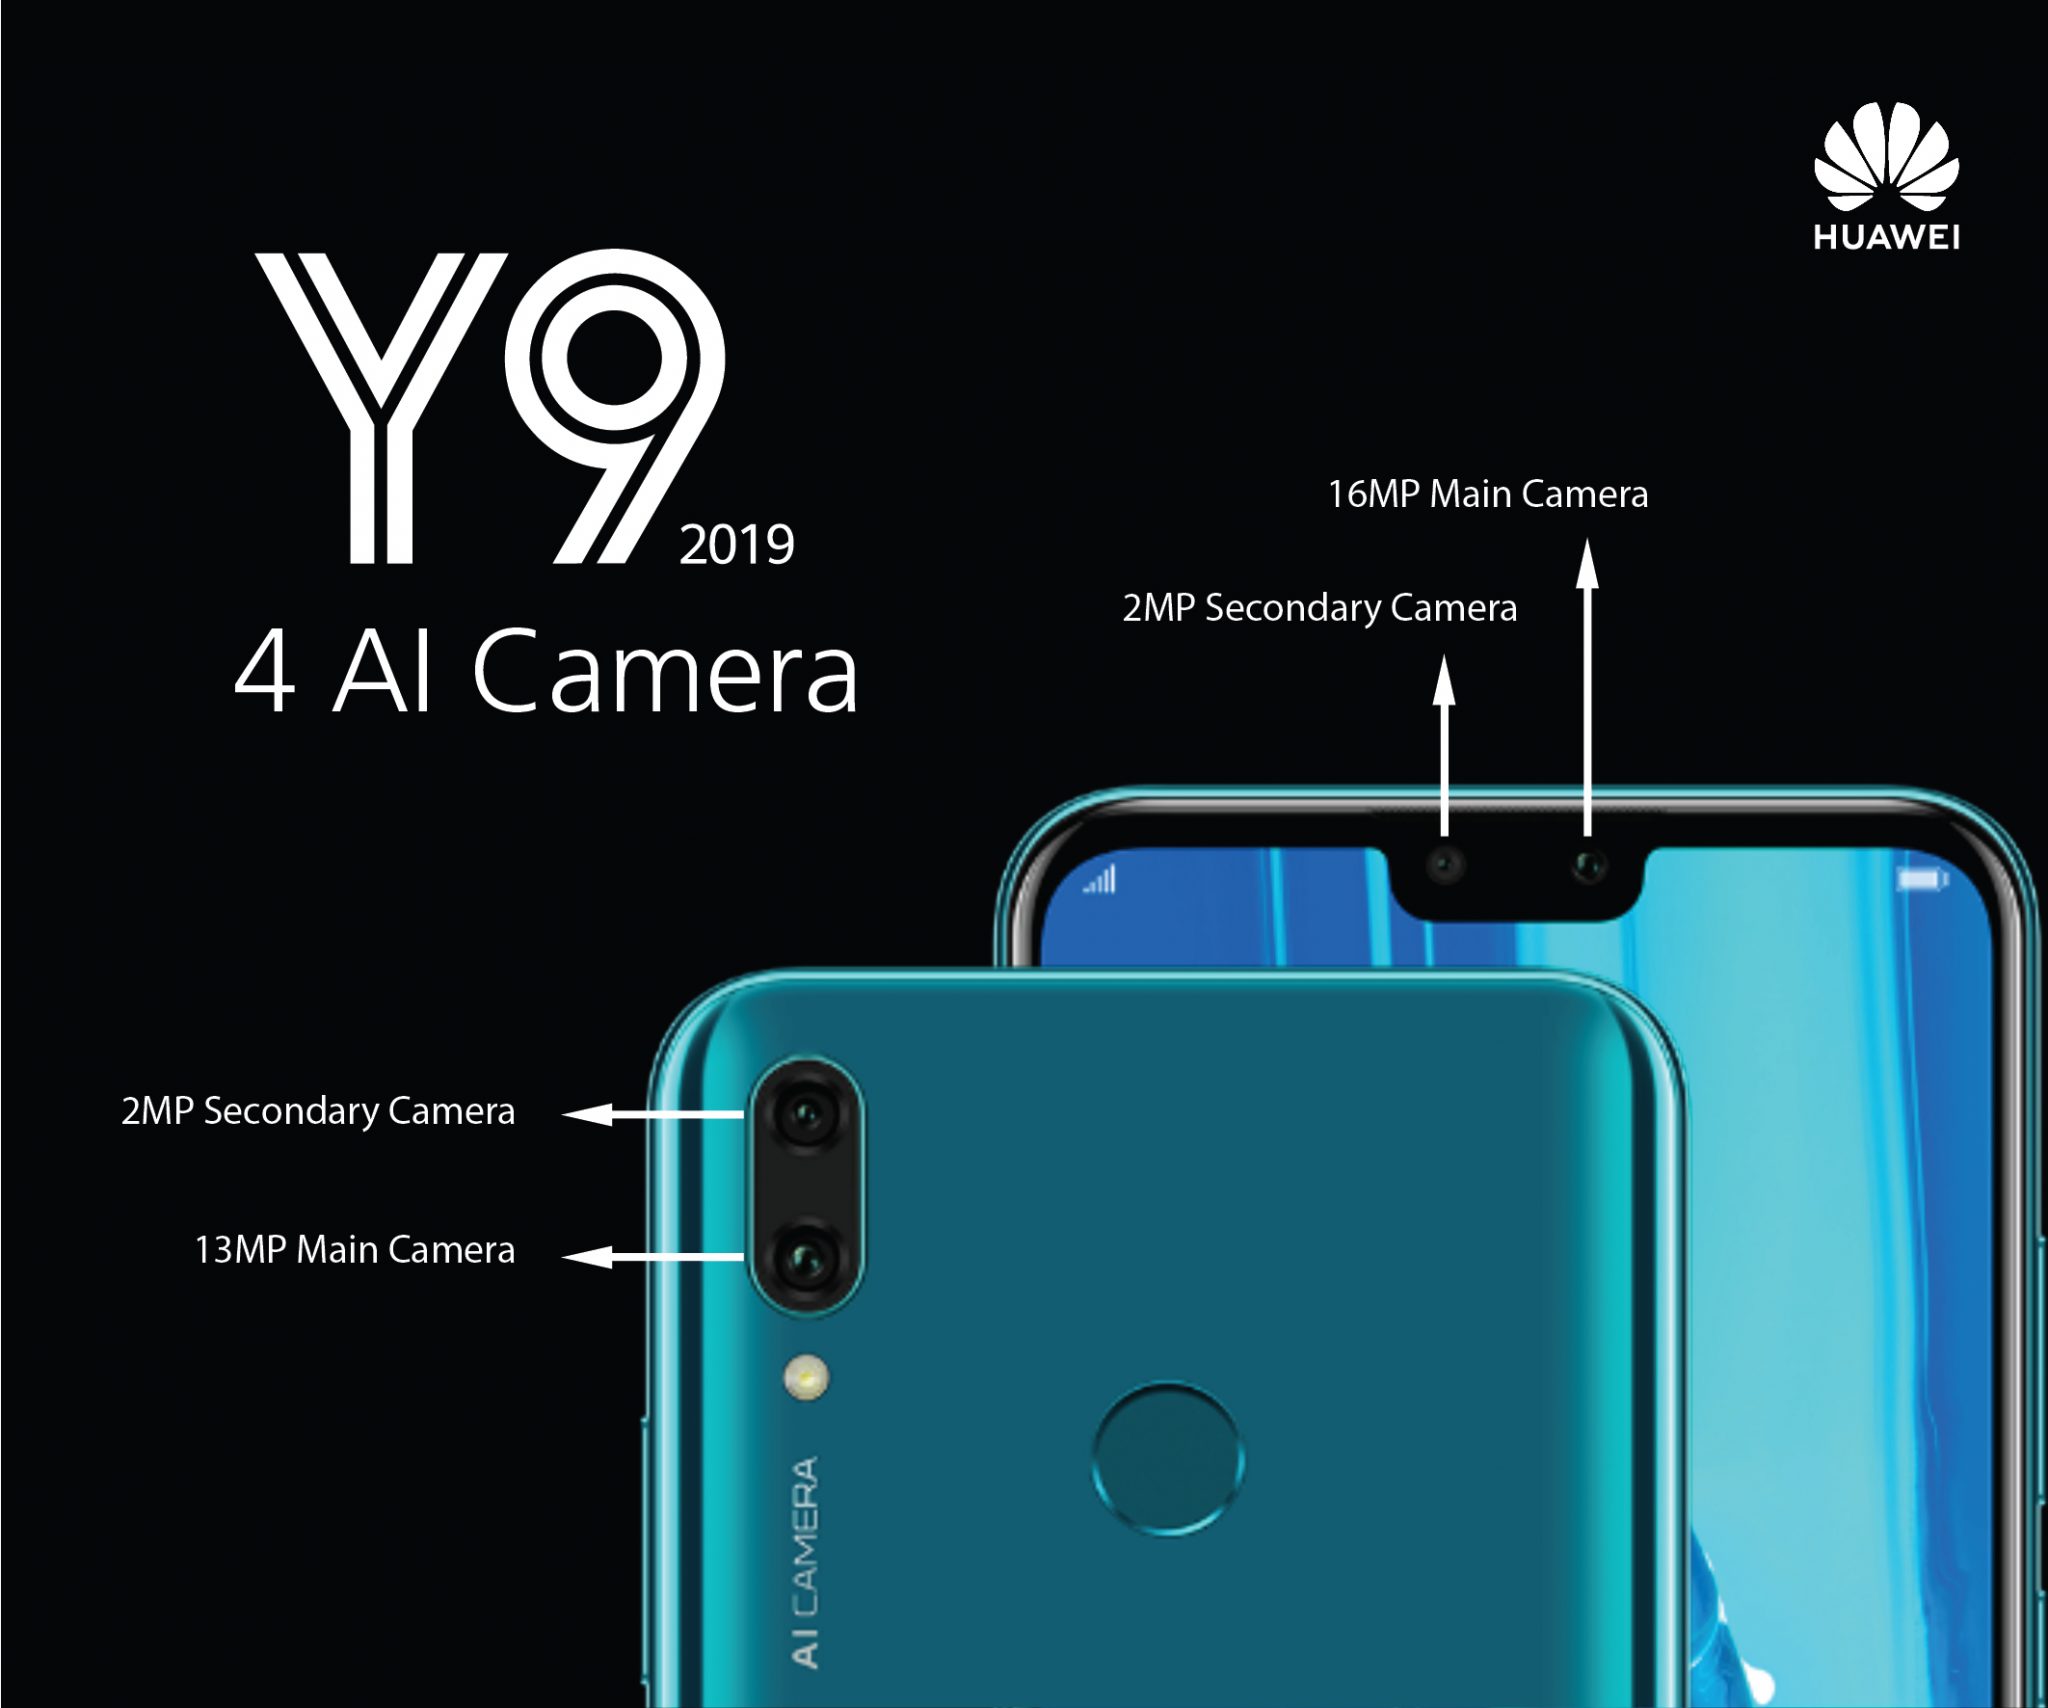 Understanding the Huawei Y9 4AI Cameras